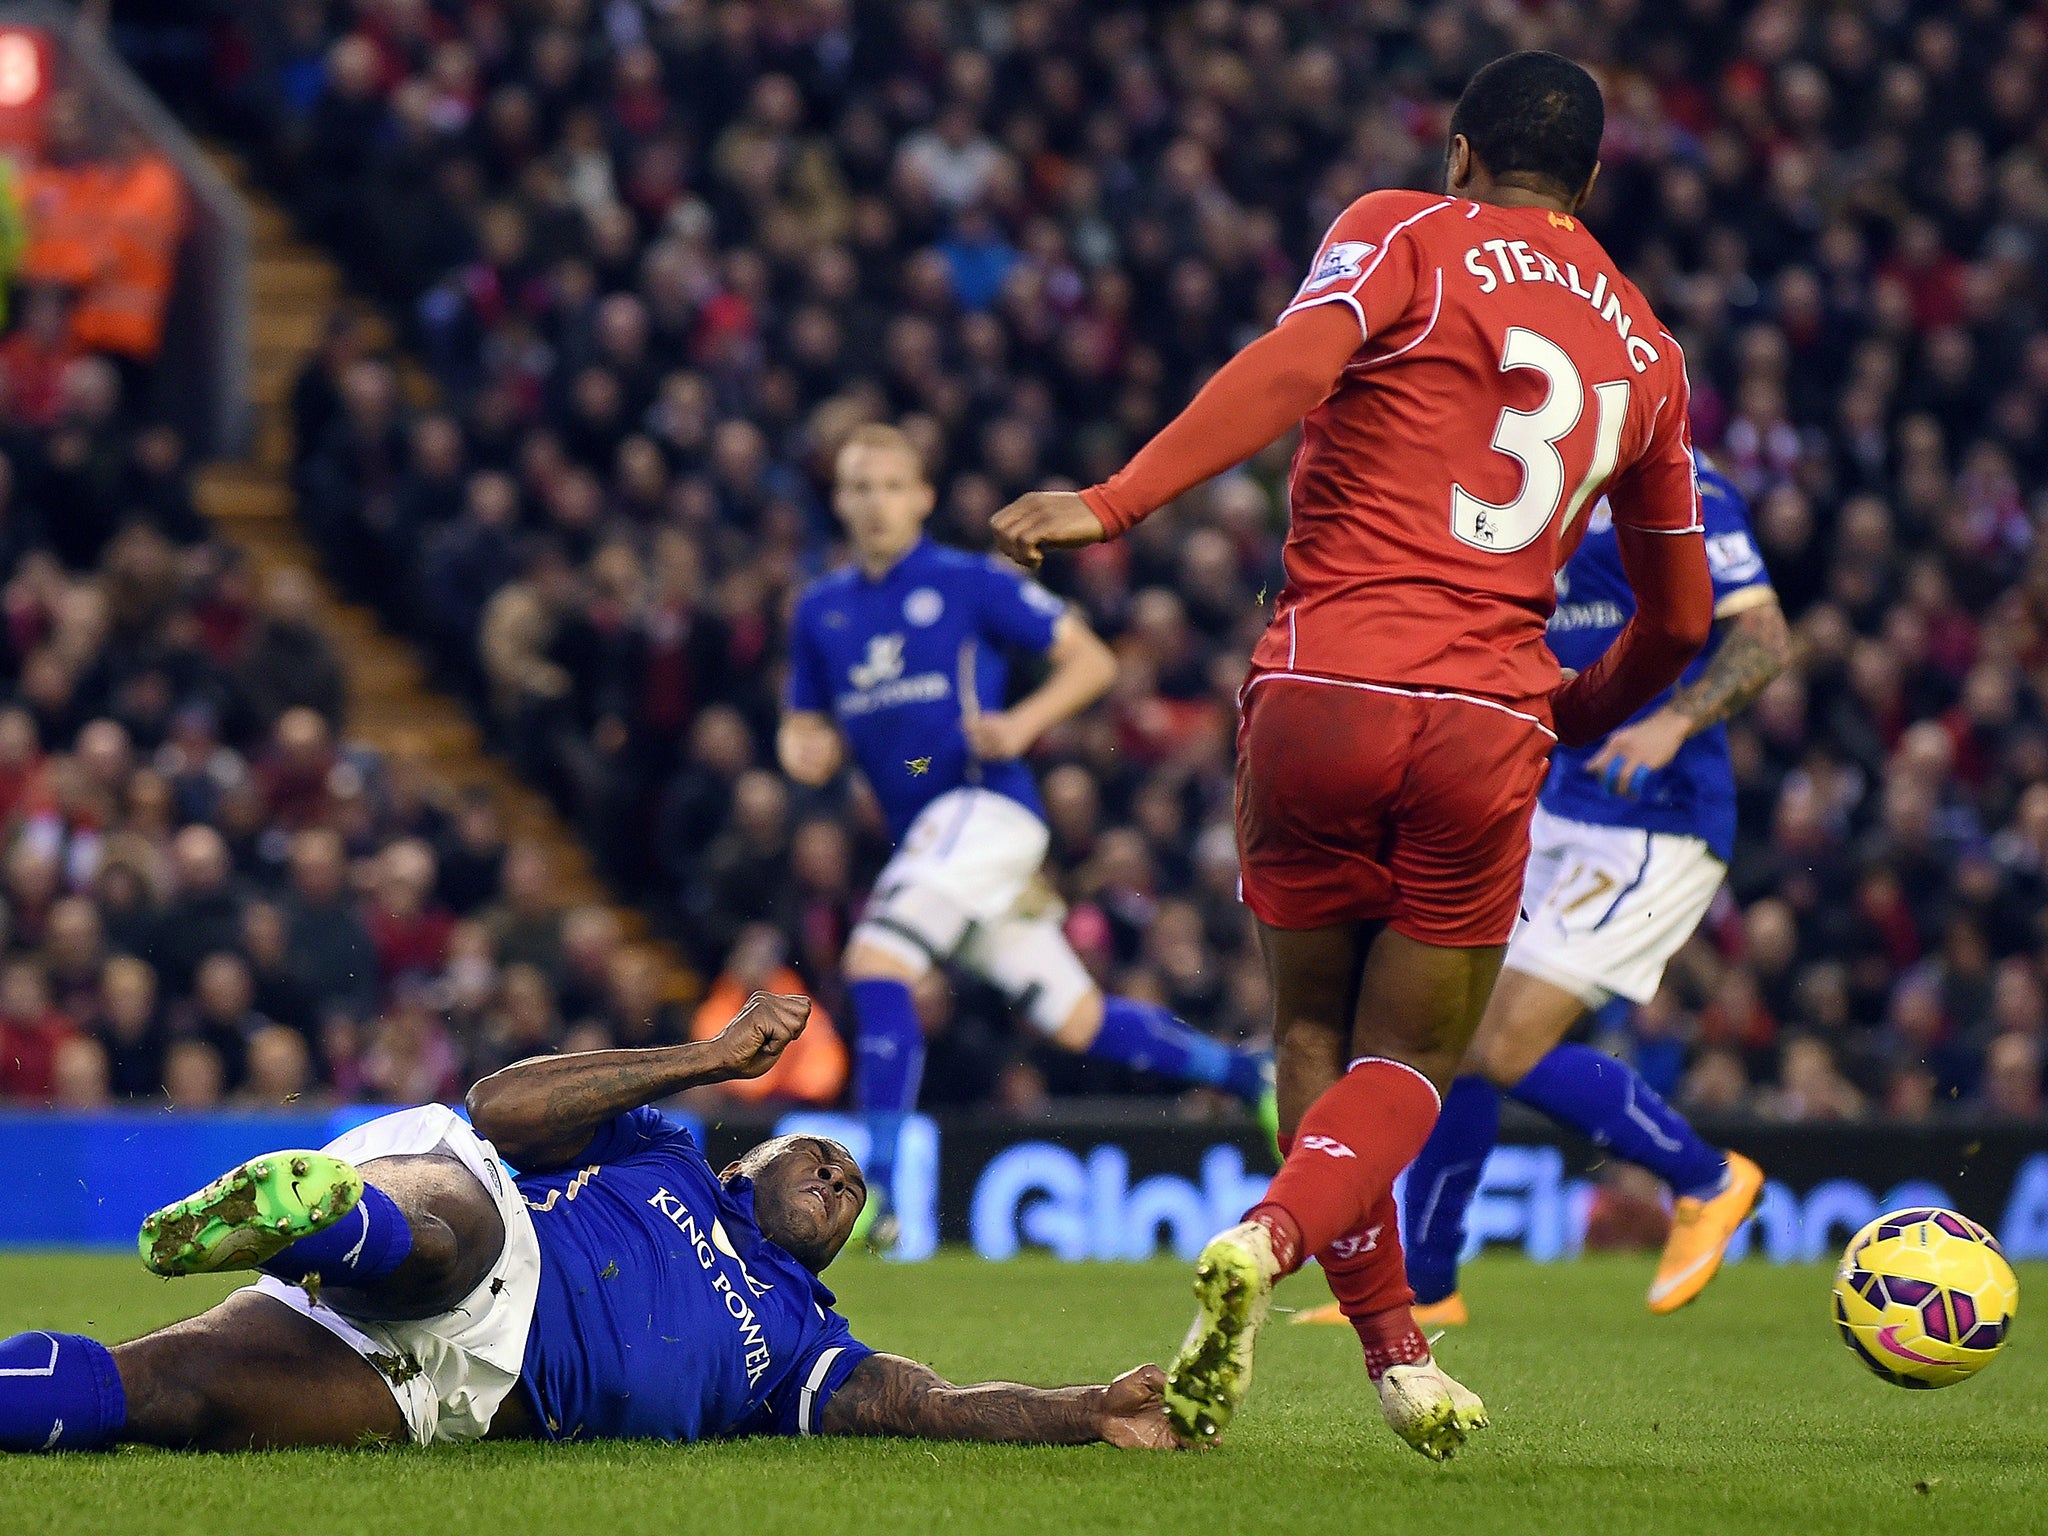 Leicester City defender Wes Morgan is pictured conceeding a penalty with a 'handball' for the first Liverpool penalty